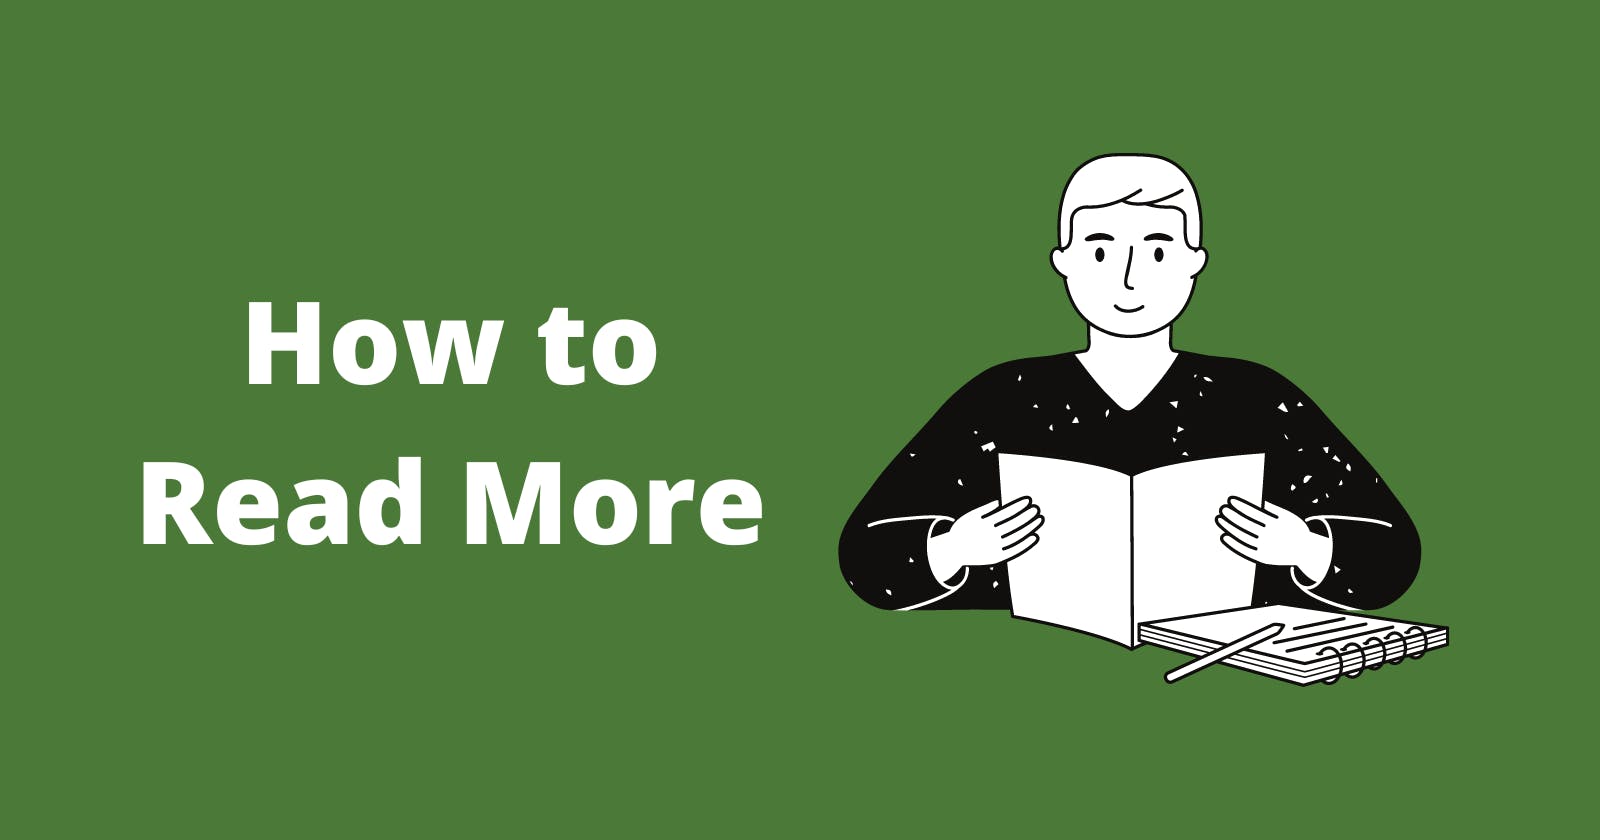 How to Read More